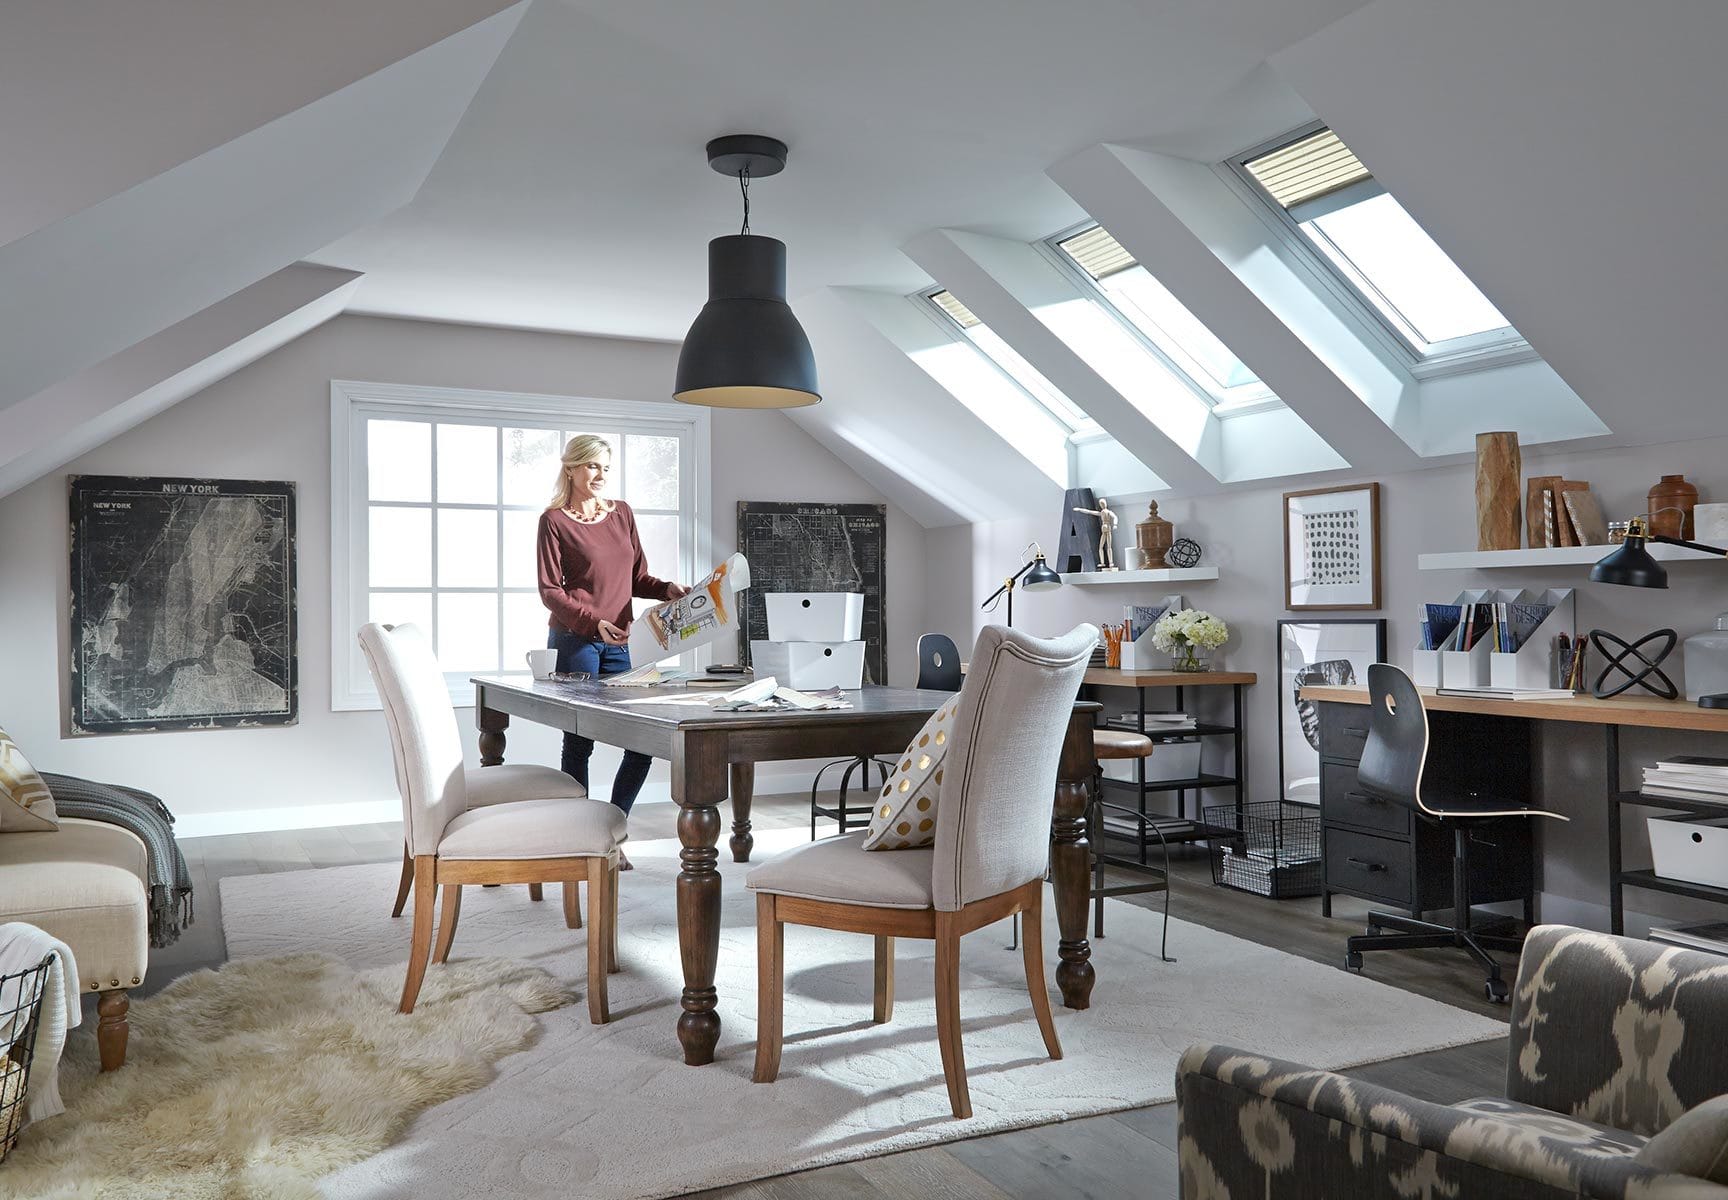 Woman works at a table in an upstairs bonus room with three skylights